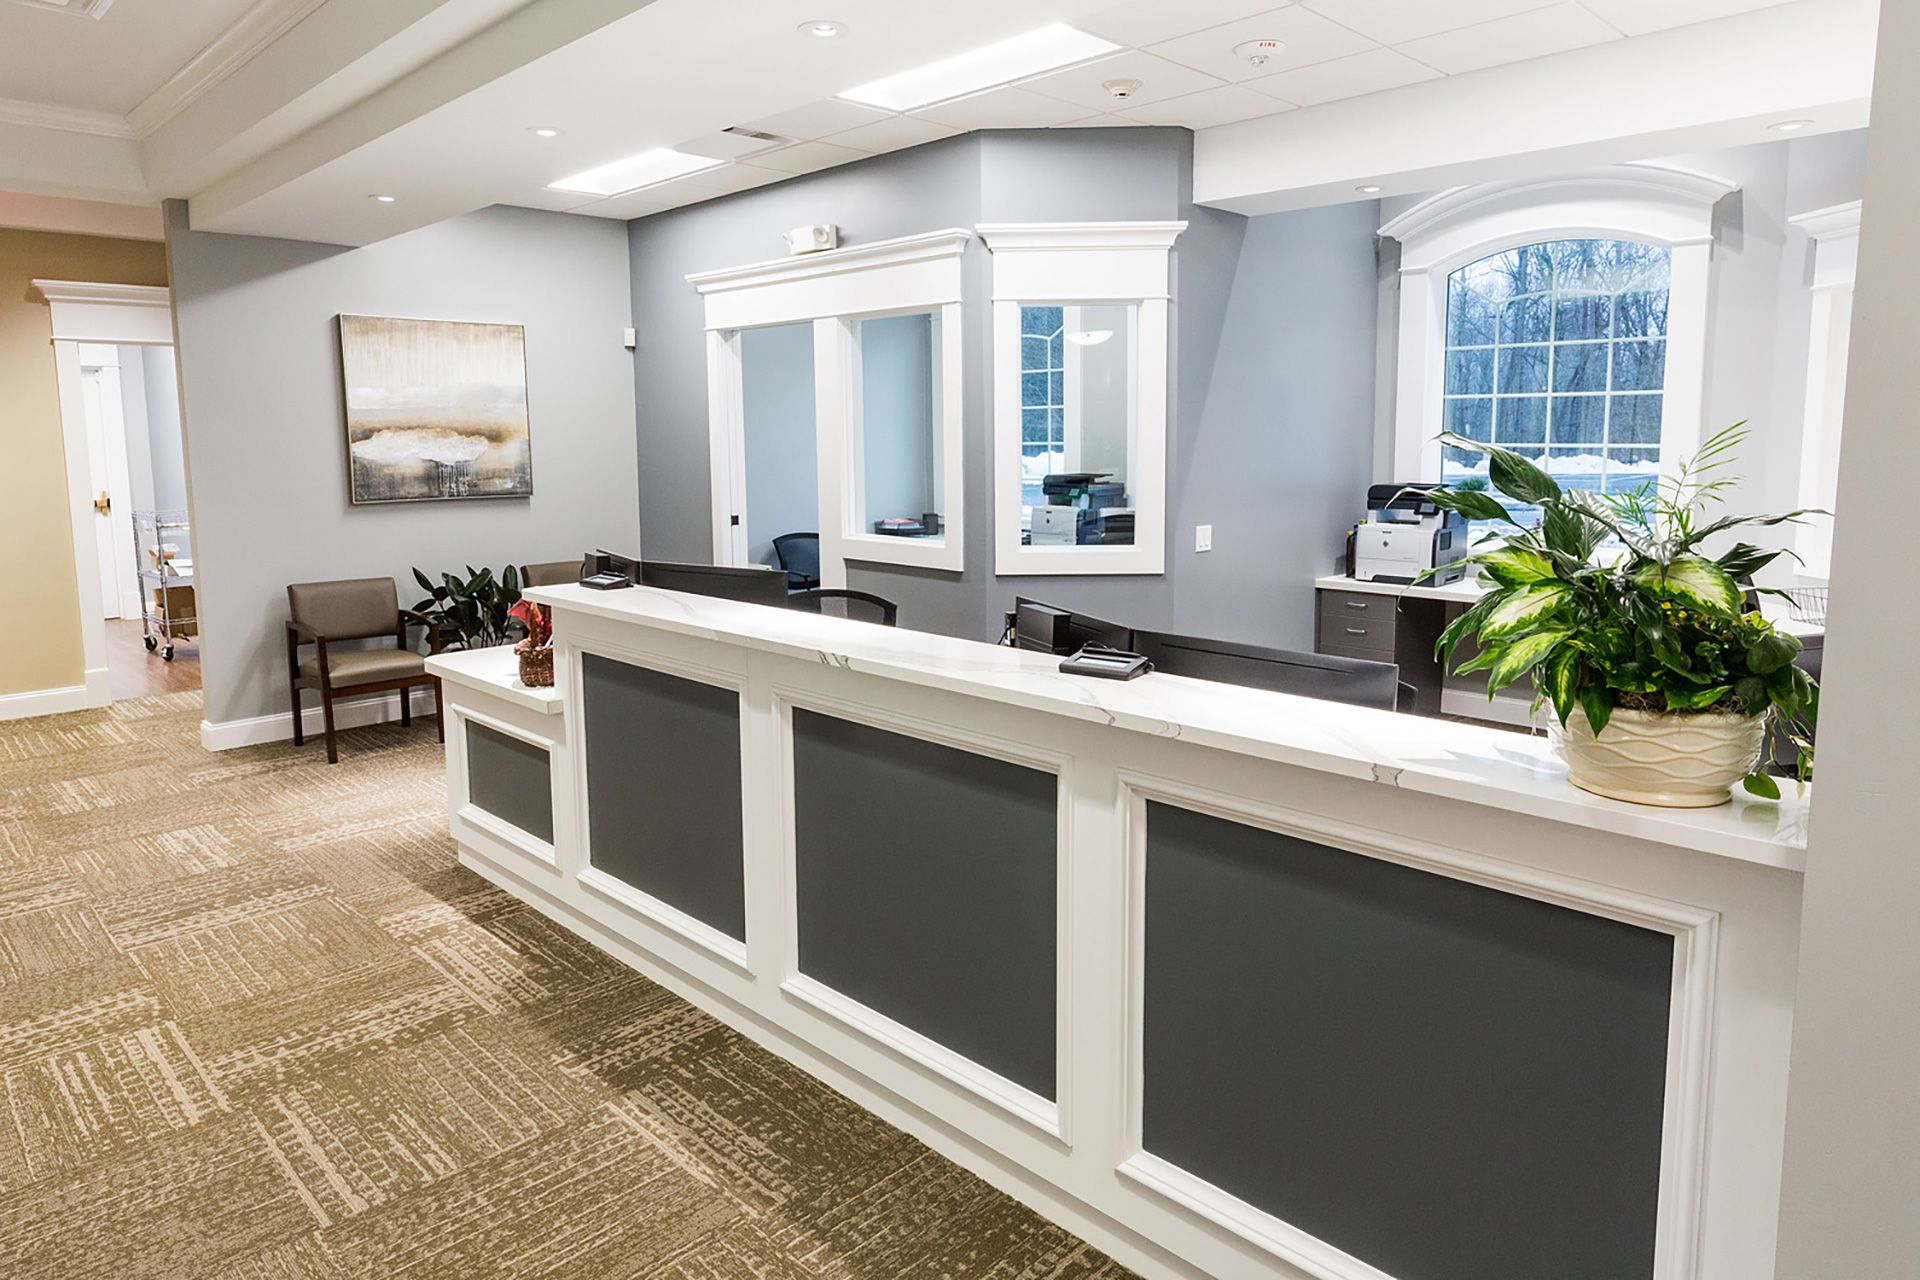 the light stuff: Just inside a beautiful stone entryway, the spacious, well-illuminated reception area welcomes patients.